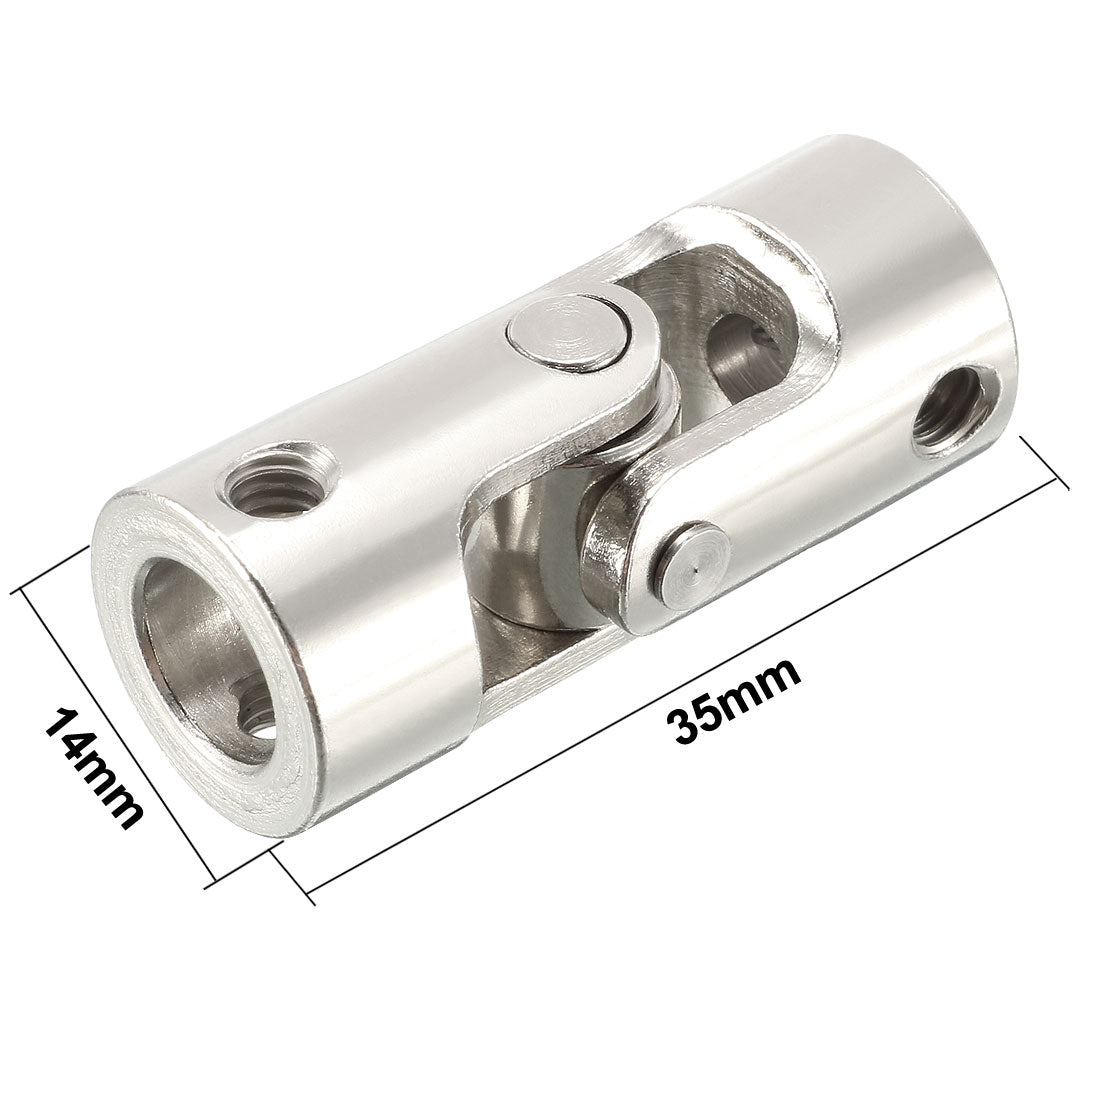 uxcell Uxcell 2pcs 8mm to 8mm Inner Dia Rotatable Universal Steering Shaft U Joint Coupler L35XD14